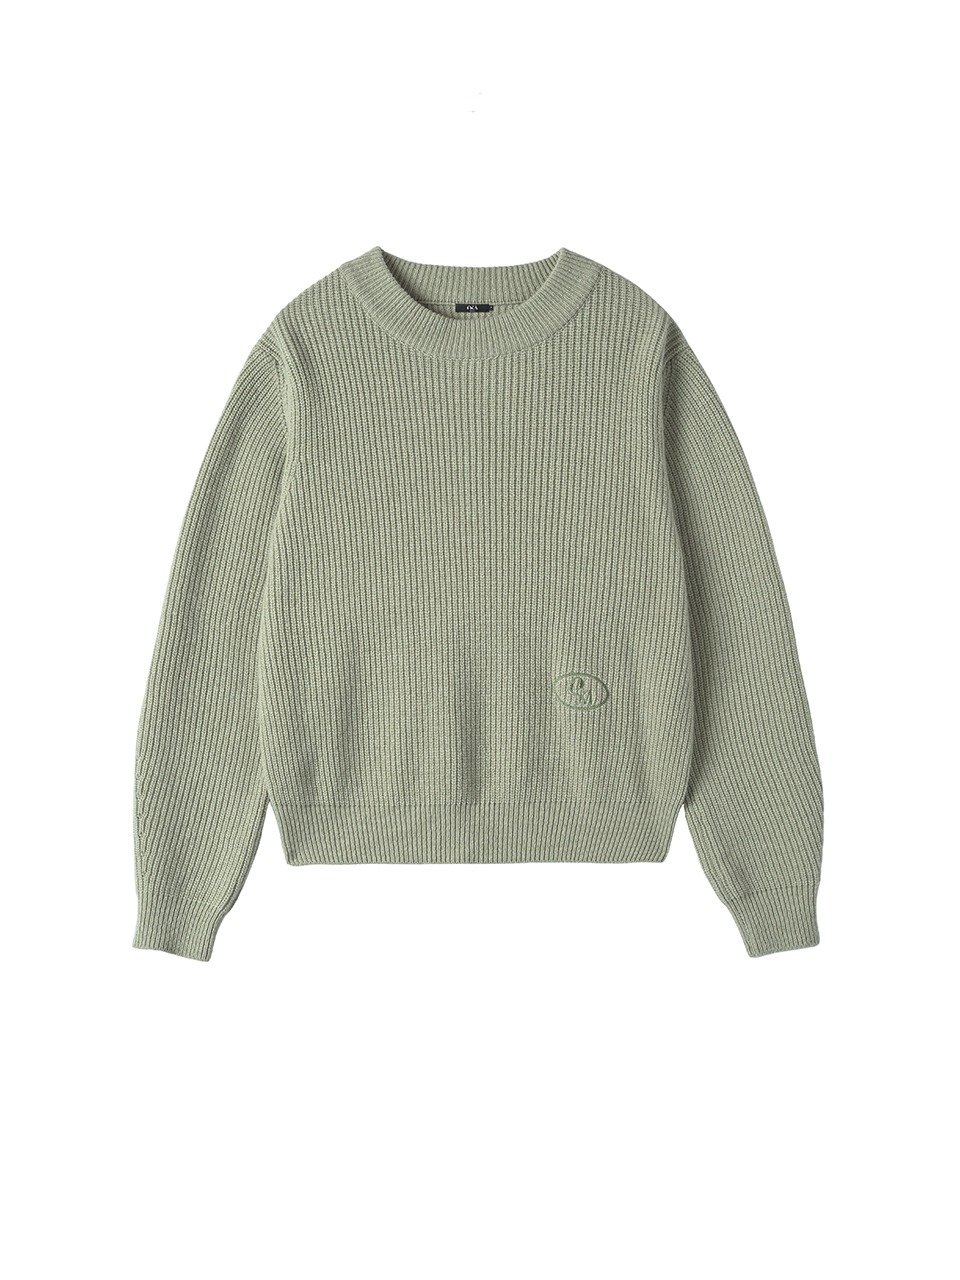 Flos Embroidery Wool Knit Mint